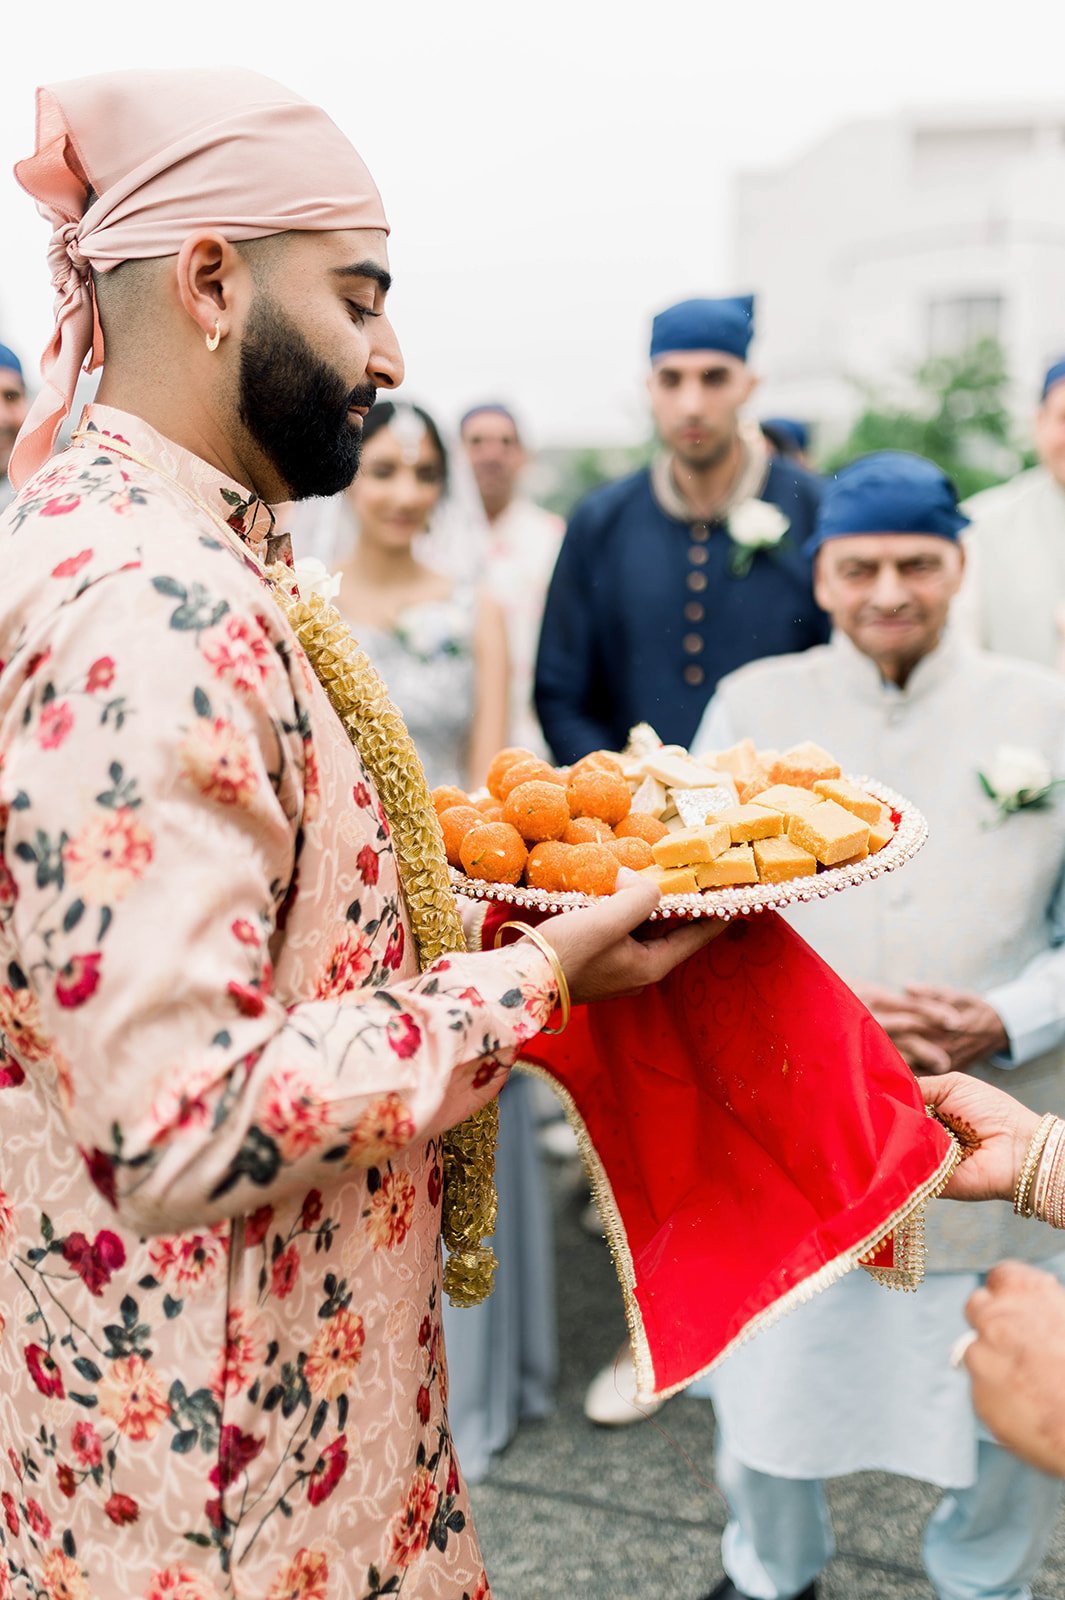 The Brides brother offer's food to the grooms family after a milni ceremony